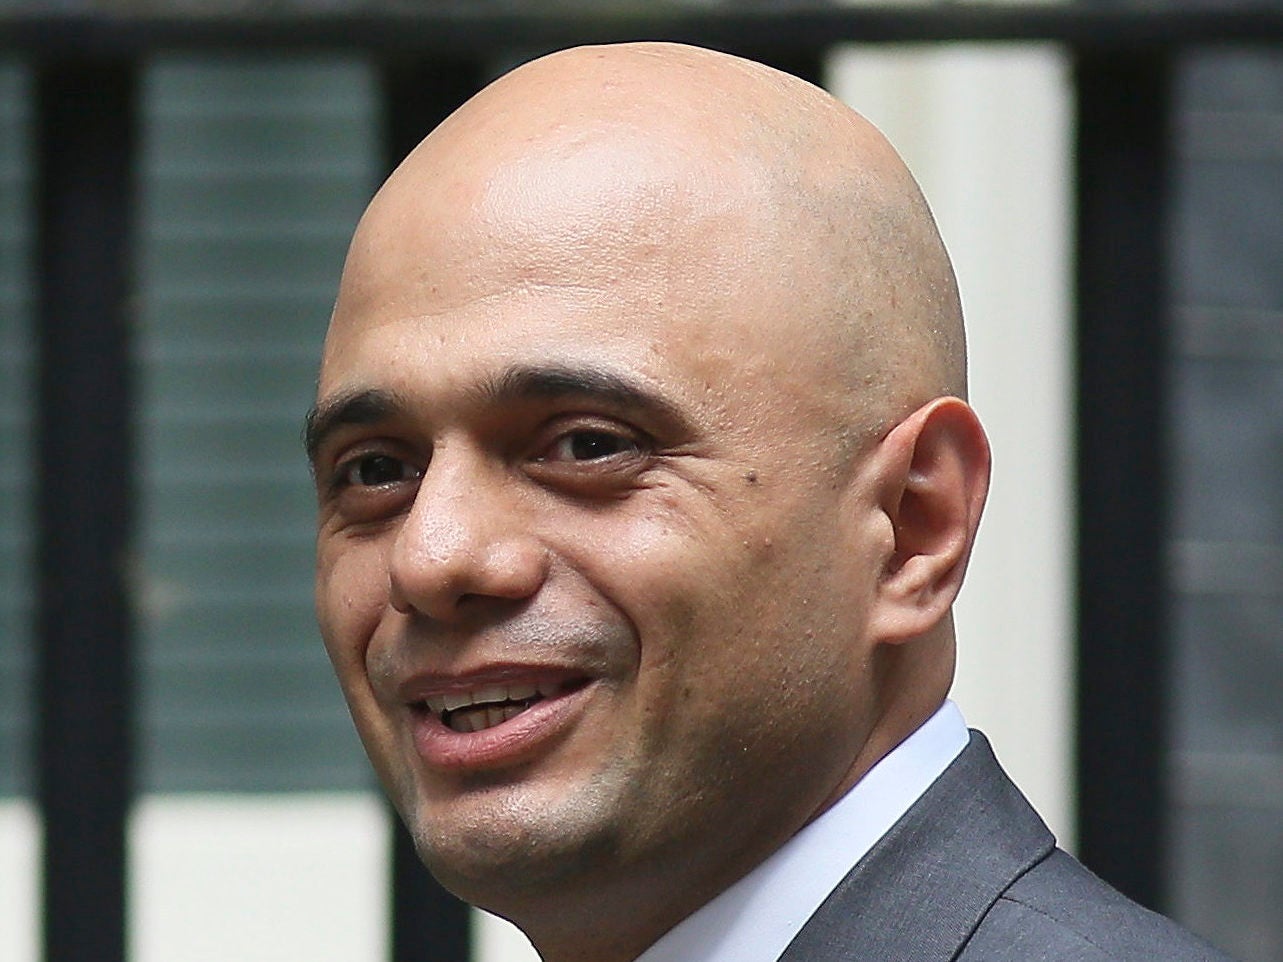 News Media Association expresses 'concern' to Sajid Javid about government inaction on 'town hall Pravdas'